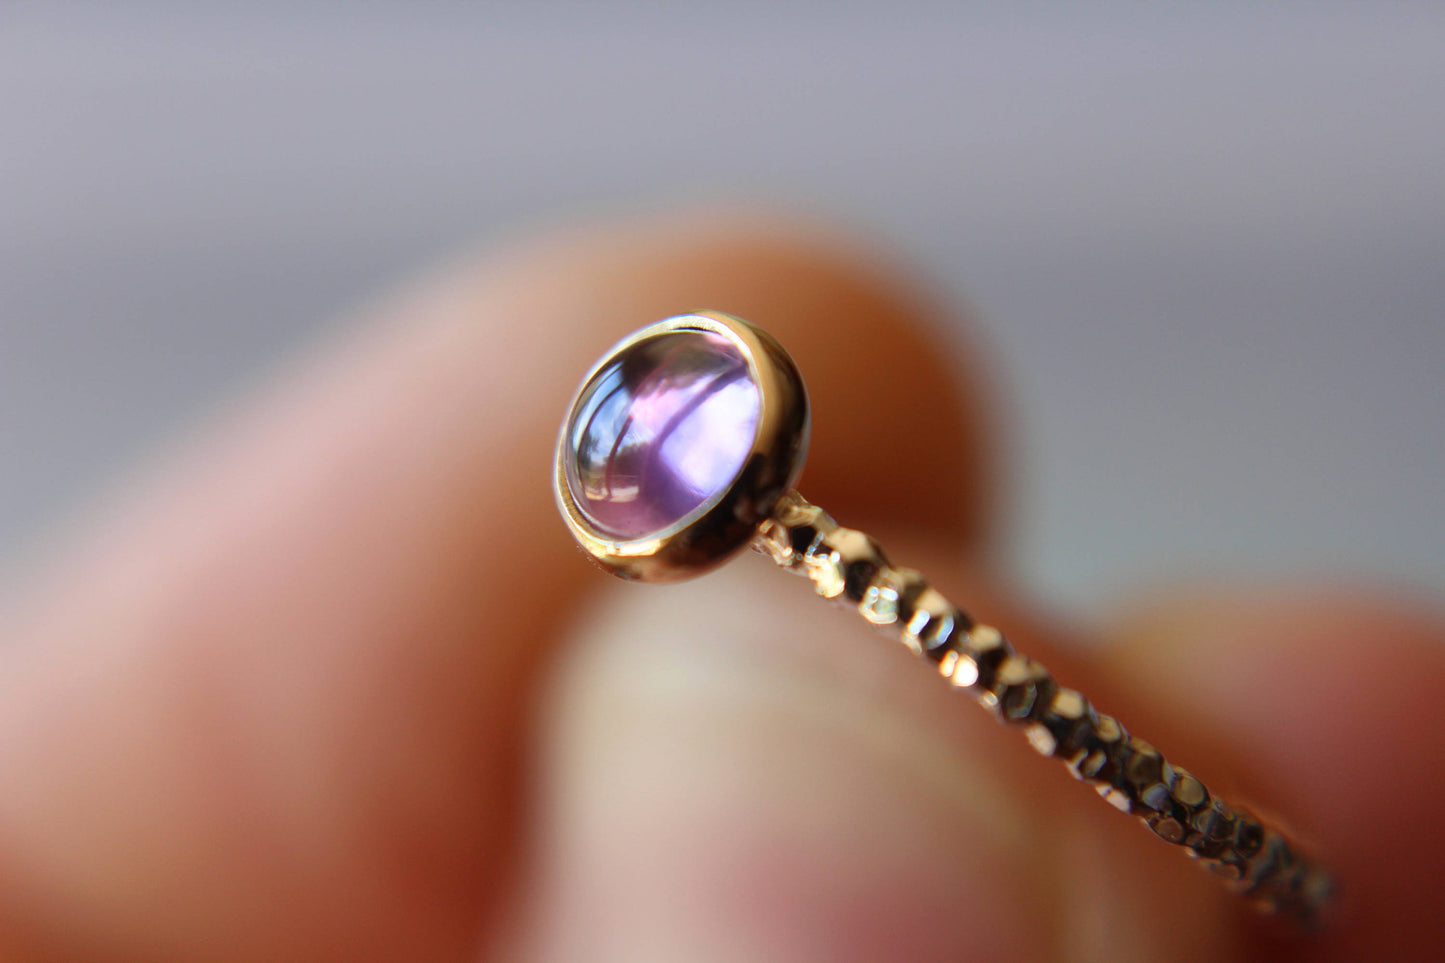 Amethyst Ring, Stacking Ring, Gemstone Ring, Cocktail Ring, Amethyst, Amethyst Engagement Ring, Amethyst Jewelry, Gold And Silver, 5mm